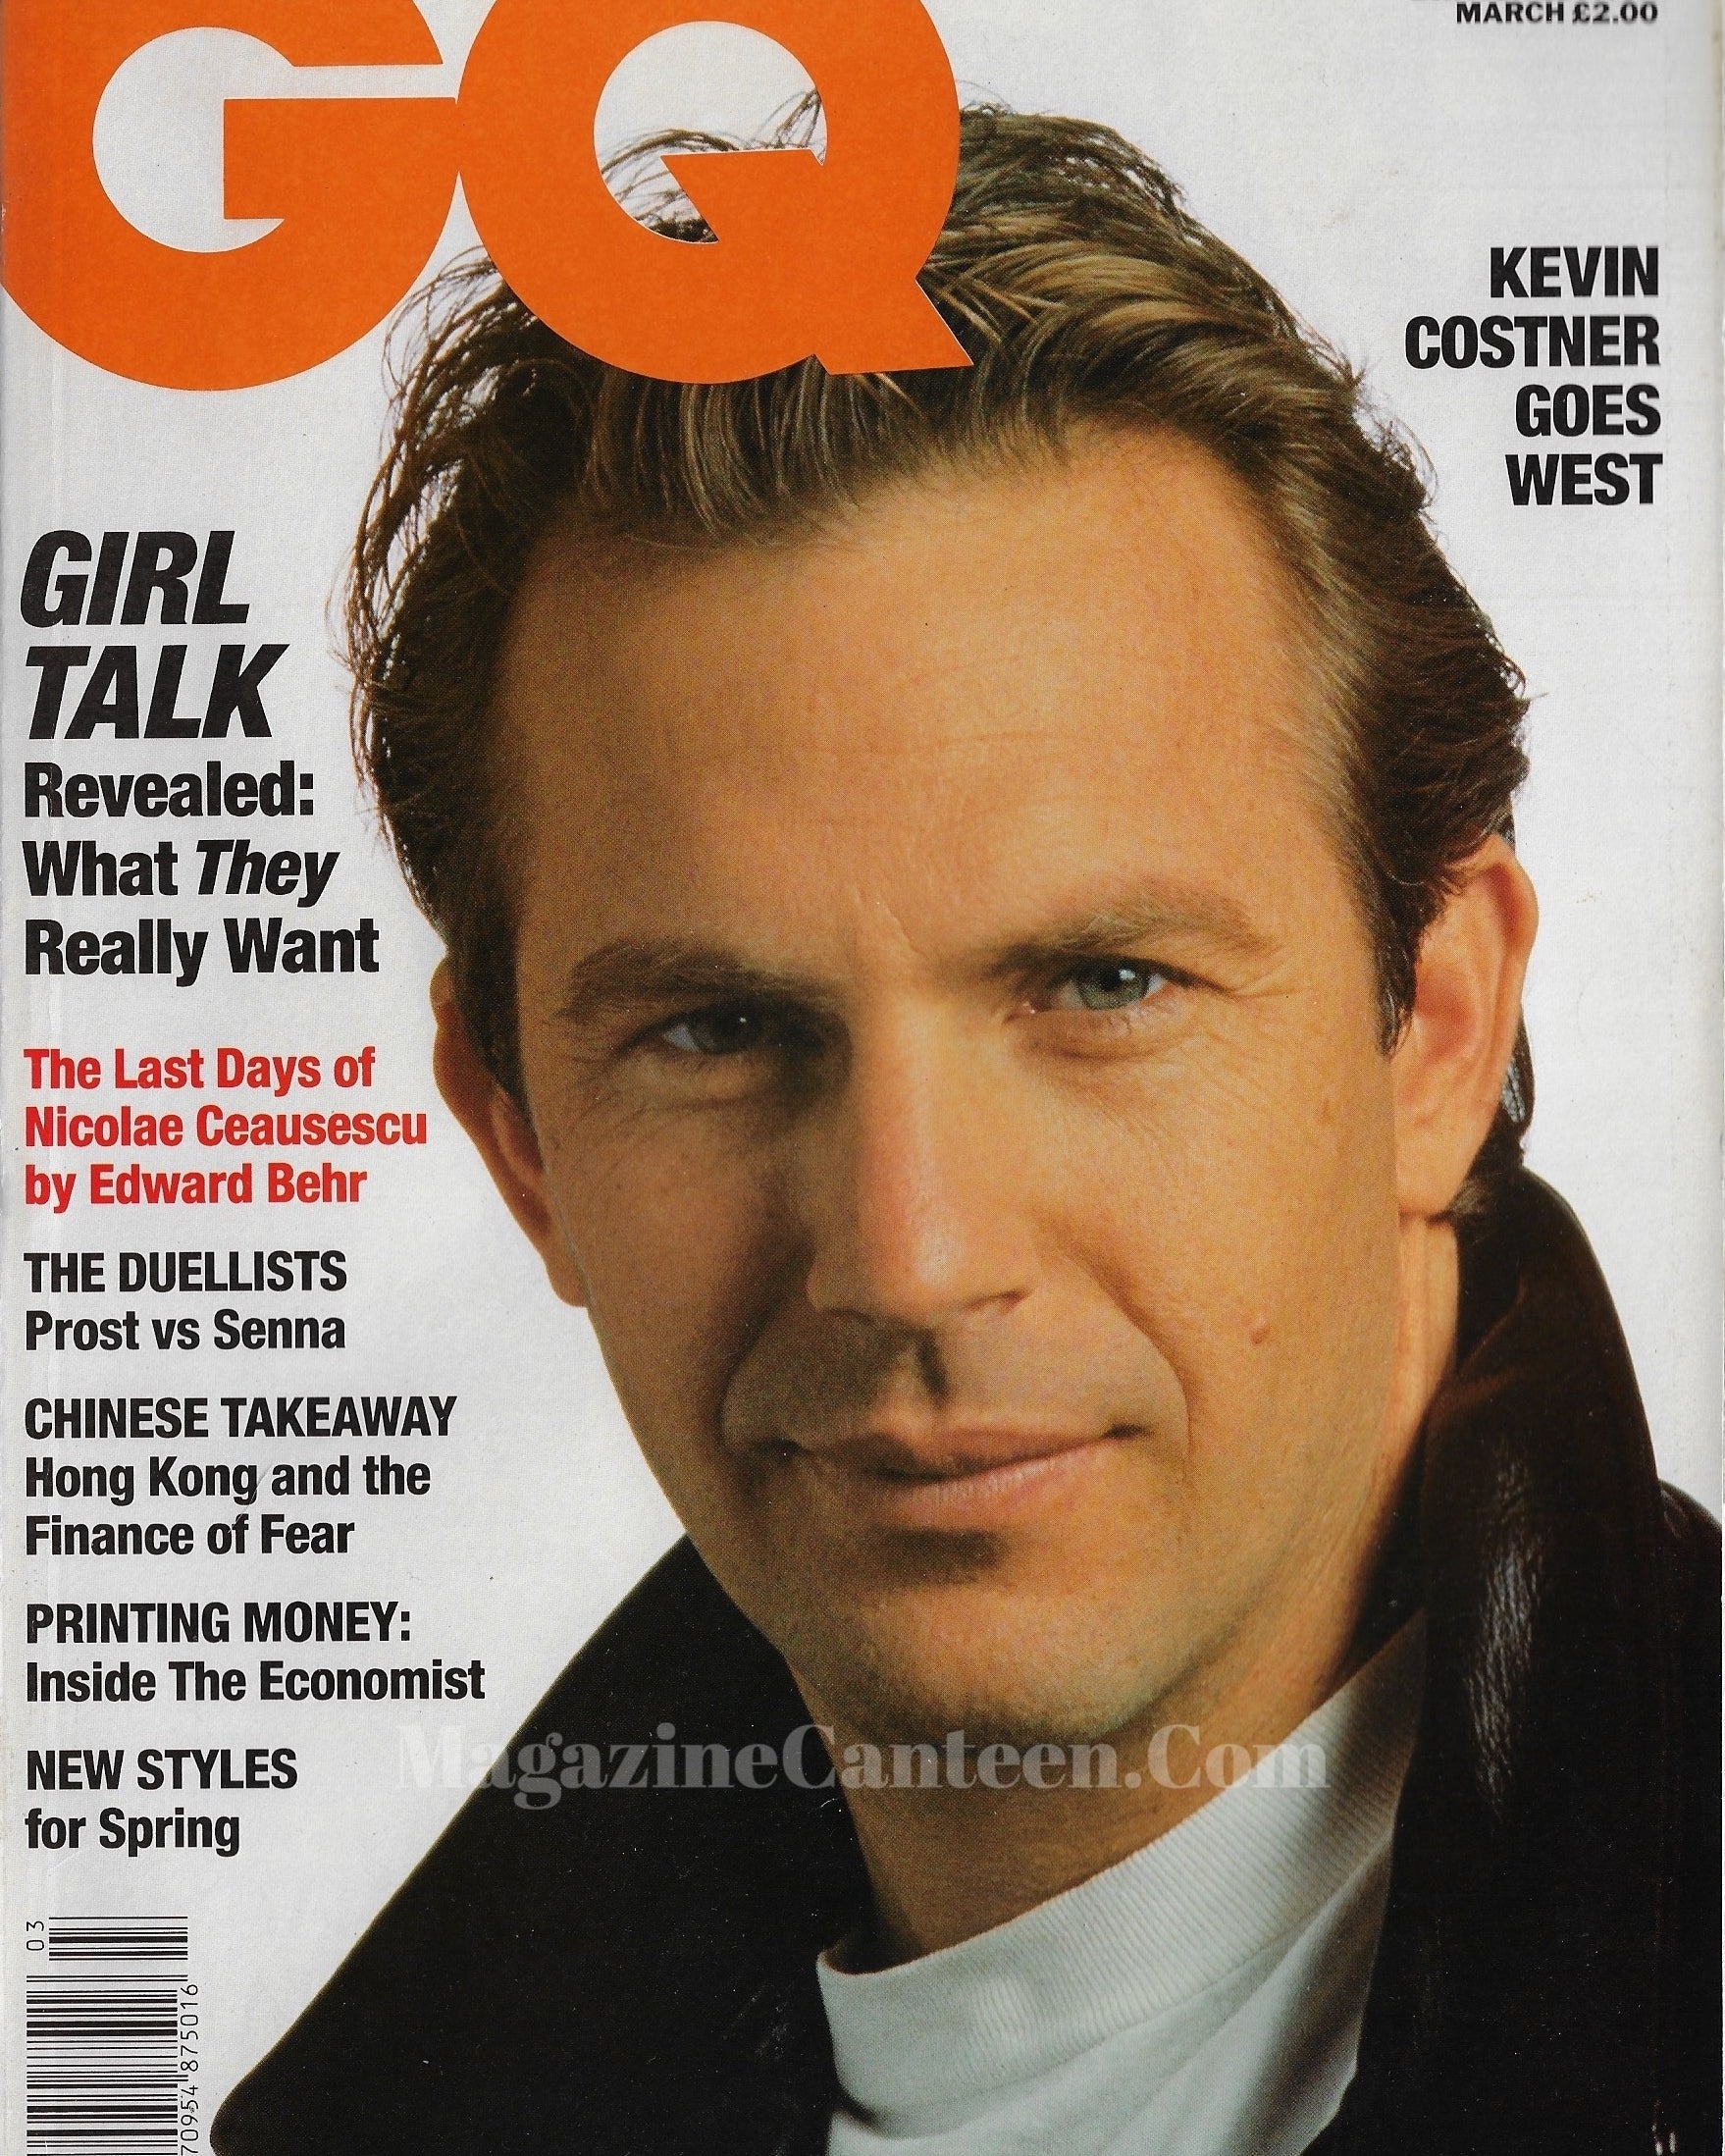 GQ Magazine March 1991 - Kevin Costner